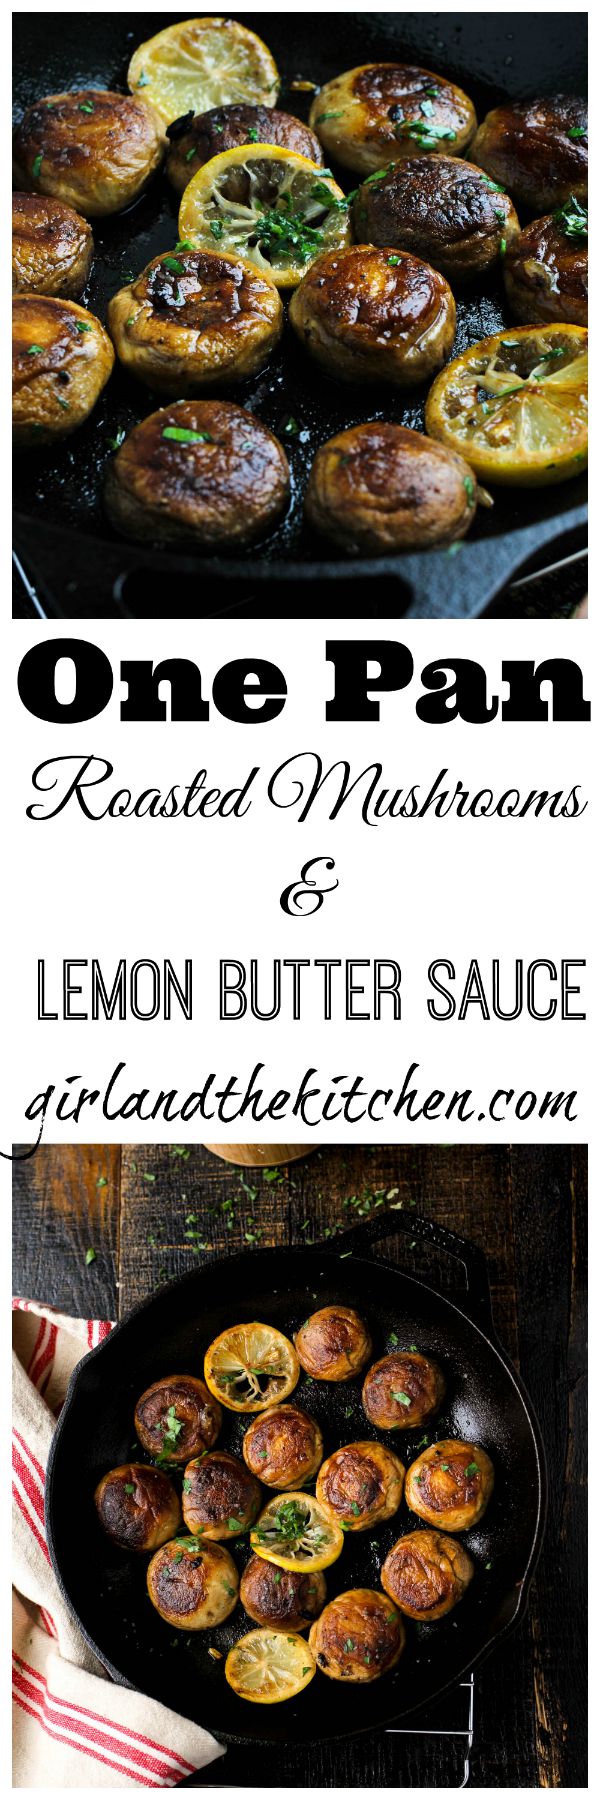 An easy and unbelievably flavorful one pan roasted mushroom dish all in a delicious lemon butter sauce.